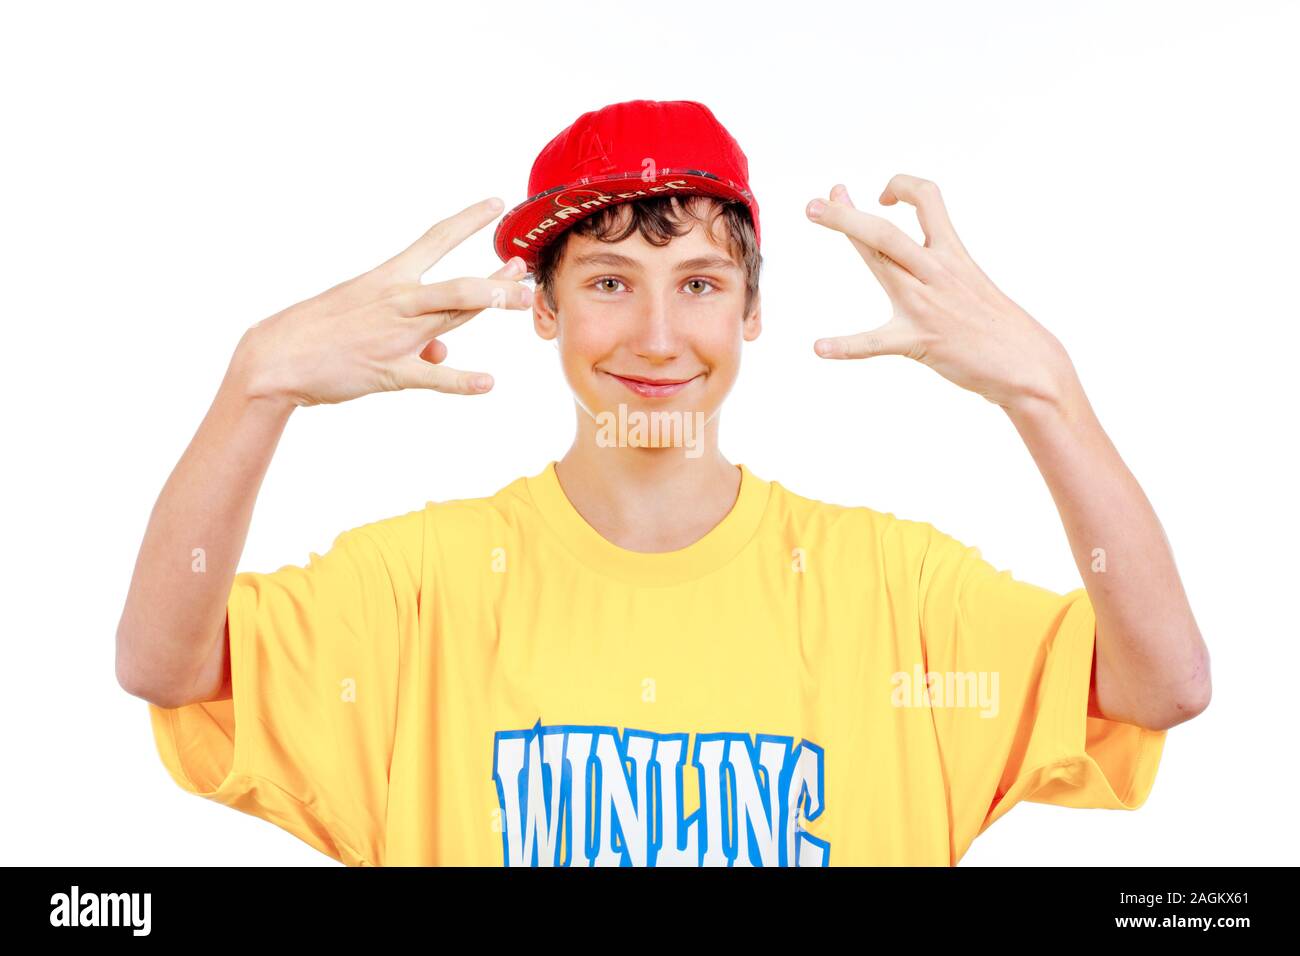 teenage boy in red baseball cap making gestures -isolated on white Stock Photo